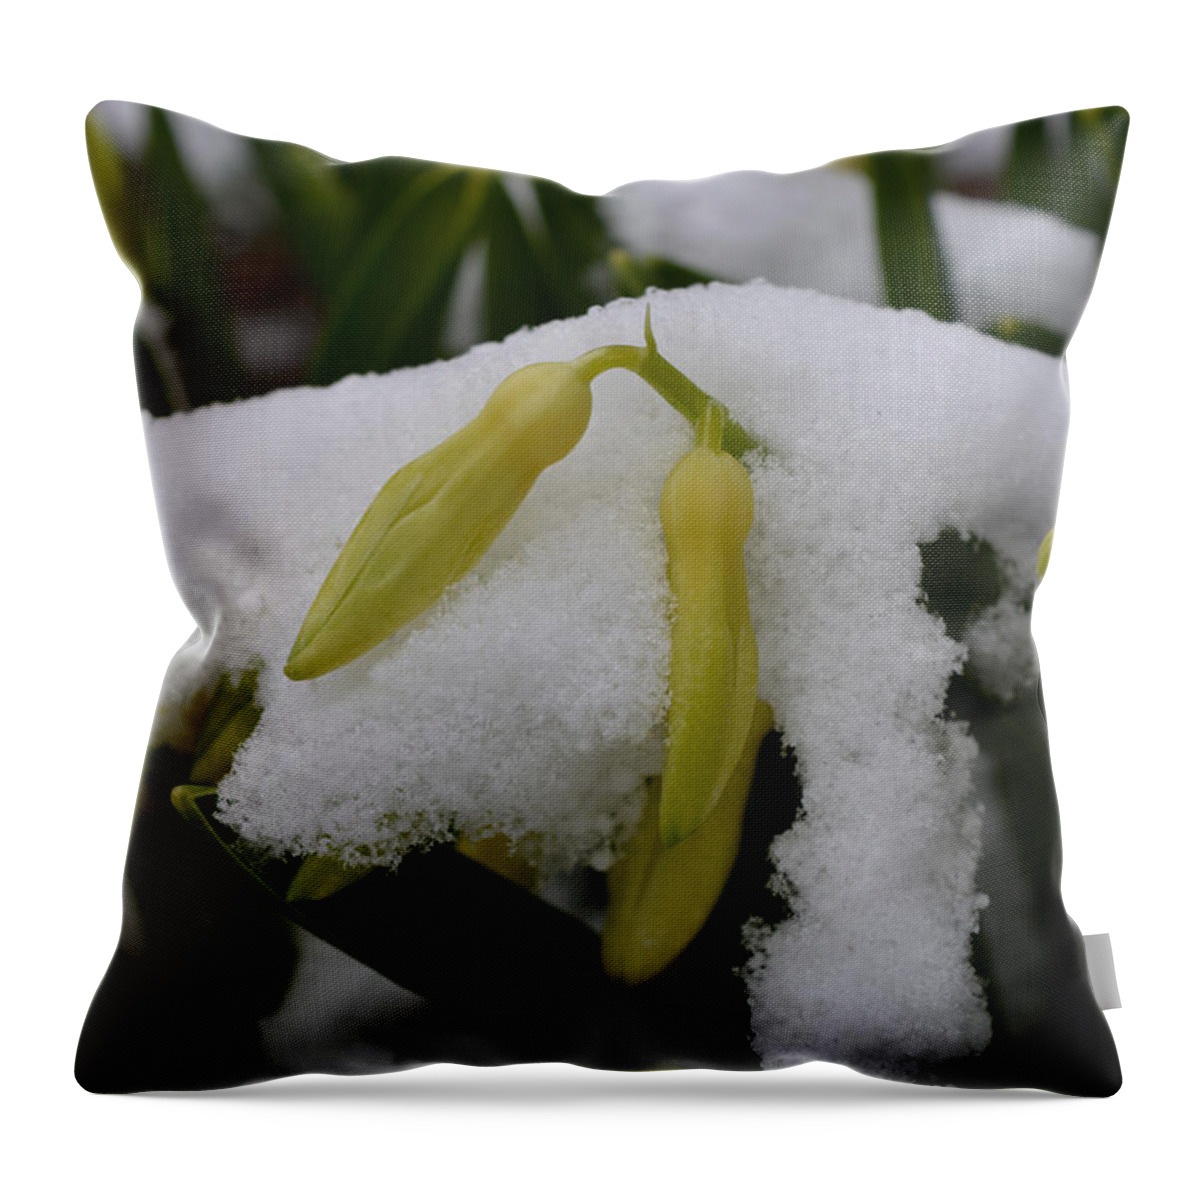 Hyacinth Throw Pillow featuring the photograph The Whitening Process by Richard Andrews